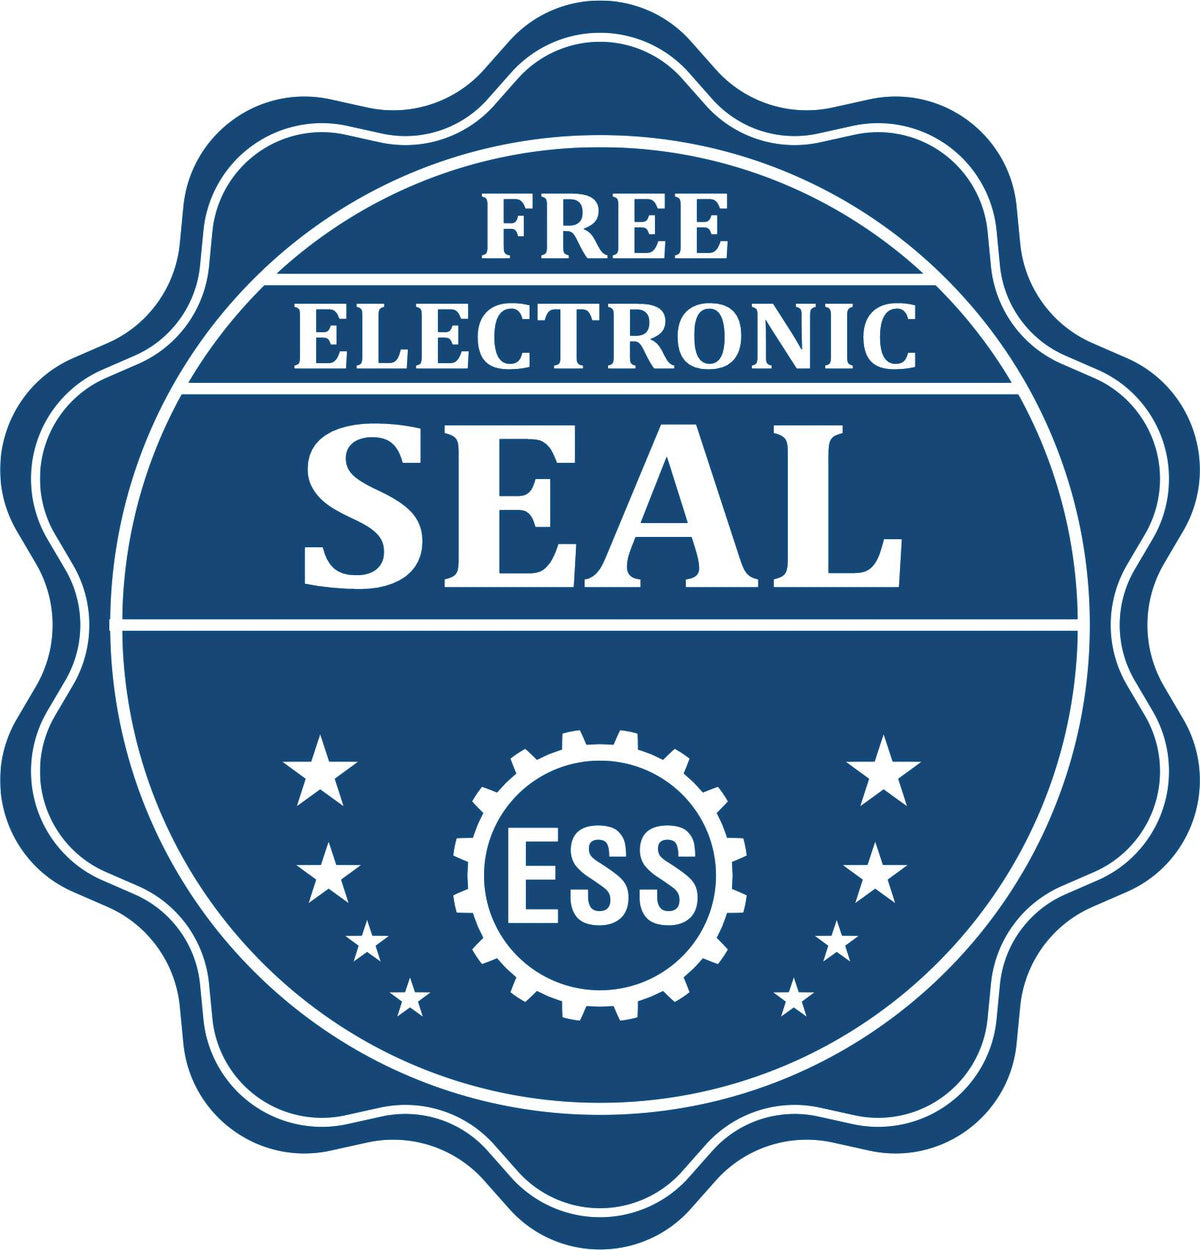 A badge showing a free electronic seal for the Premium MaxLight Pre-Inked North Dakota Engineering Stamp with stars and the ESS gear on the emblem.